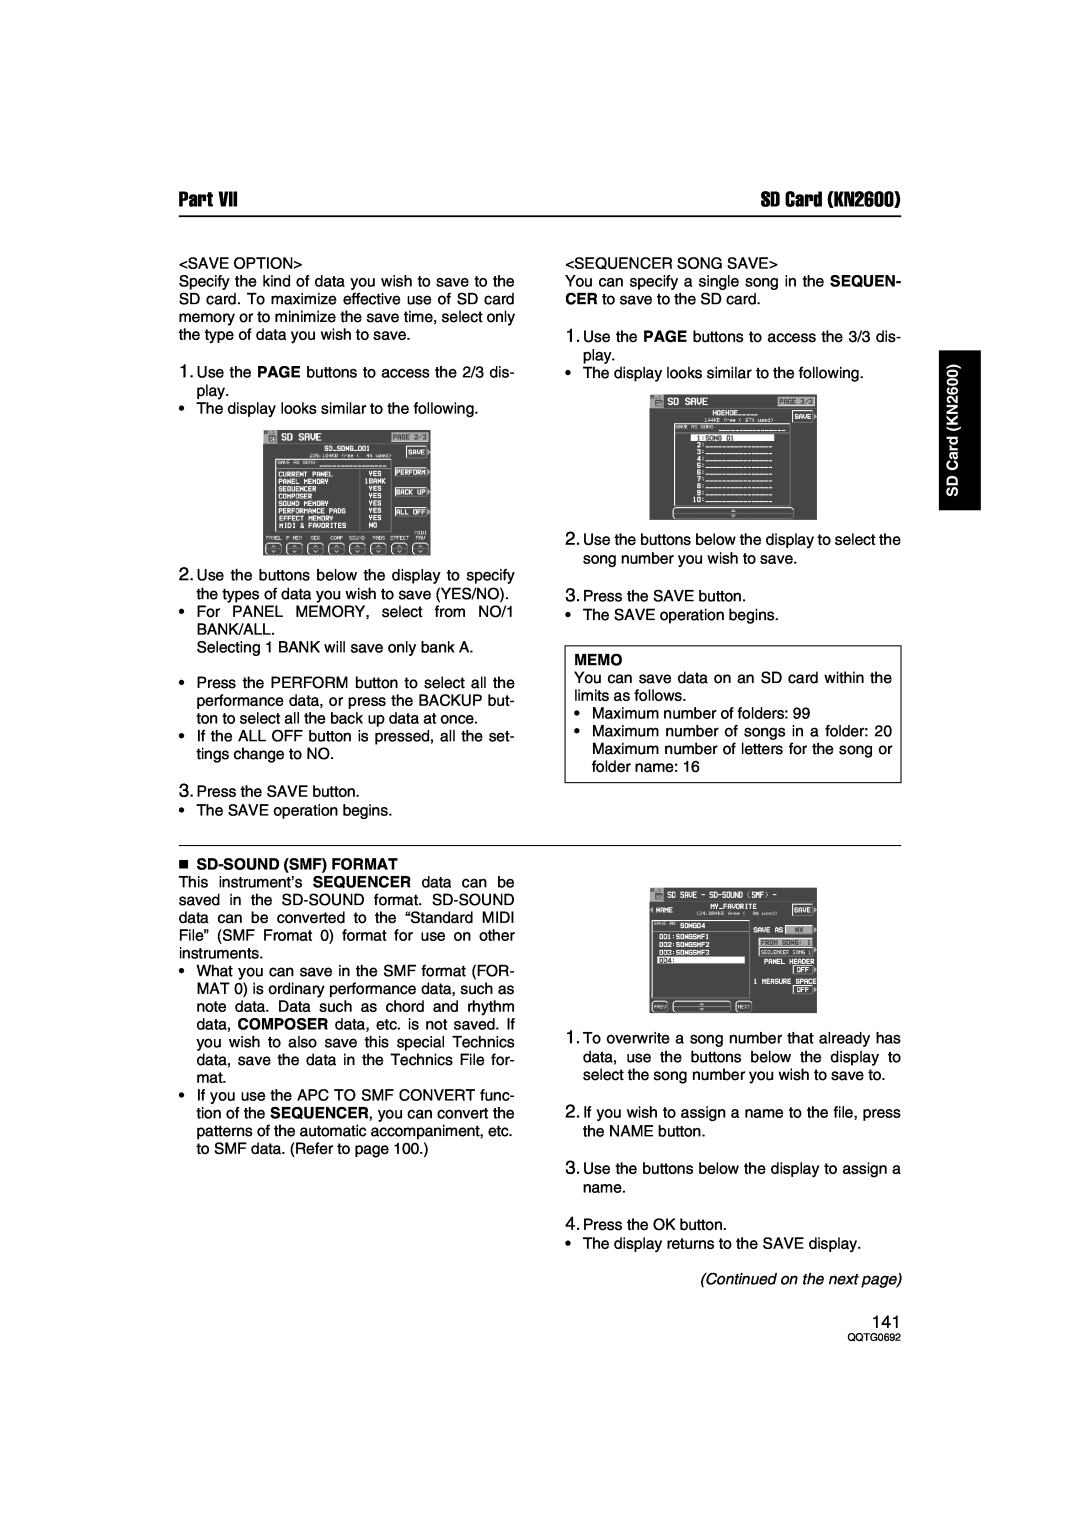 Panasonic SX-KN2400, SX-KN2600 manual Sd-Sound Smf Format, Part, SD Card KN2600, Memo, Continued on the next page 